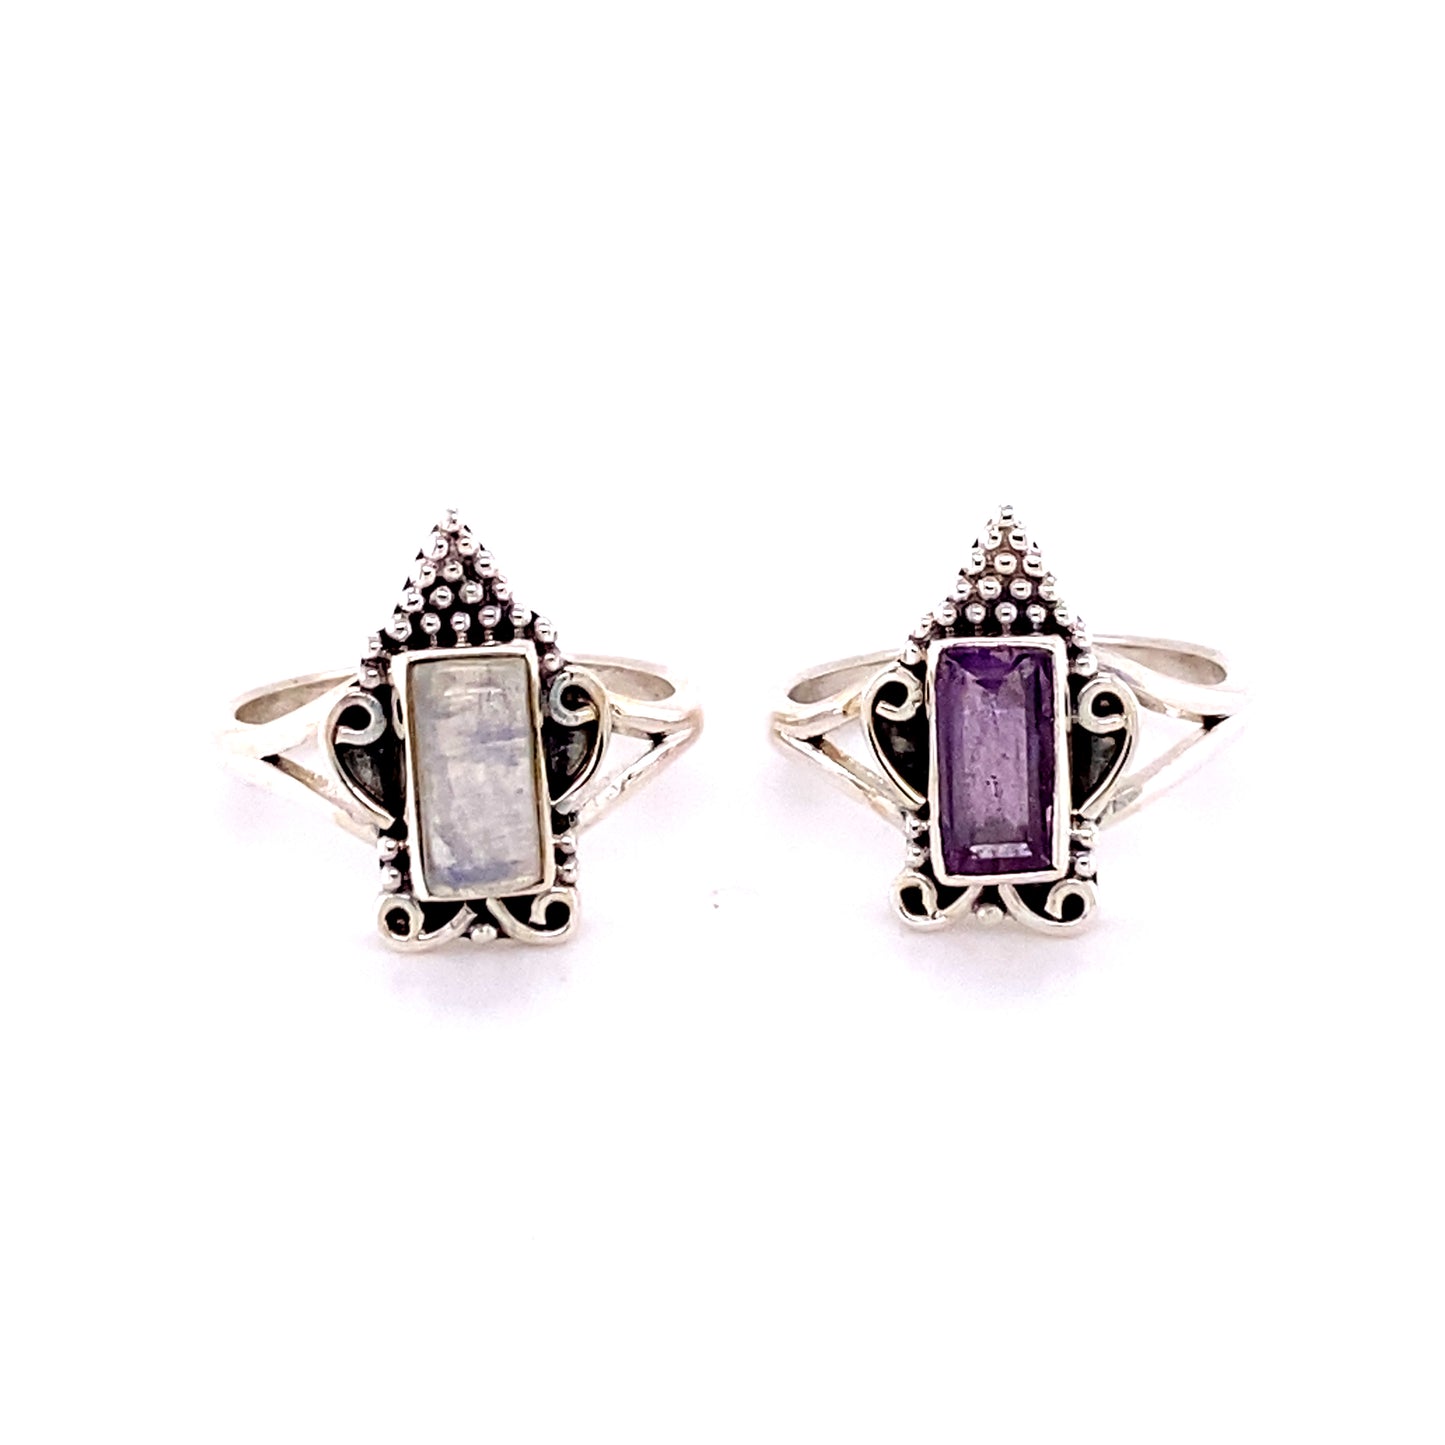 A pair of Bohemian Princess Rings by Super Silver with moonstones and amethyst stones.